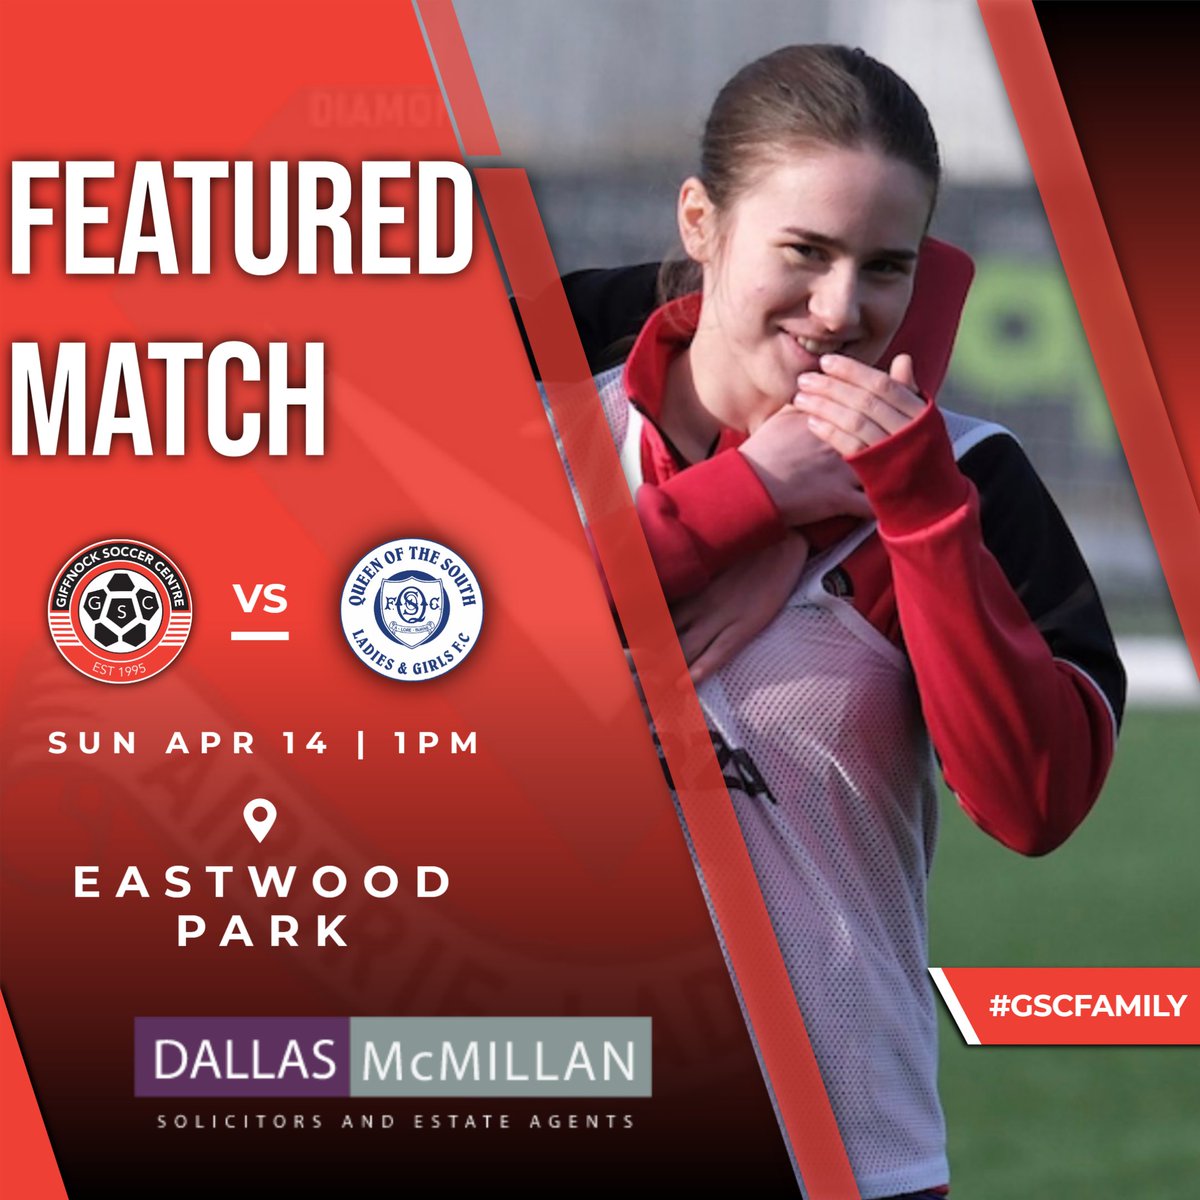 𝗙𝗘𝗔𝗧𝗨𝗥𝗘𝗗 𝗠𝗔𝗧𝗖𝗛 🔴⚽⚫ Come along to Eastwood Park this Sunday to support the girls in their final home league match of the season! 👕 GSC Women 🆚 Queen of the South Ladies 📍 Eastwood Park 🕐 1pm KO 📆 Sunday 14 April #monthenock #gscfamily